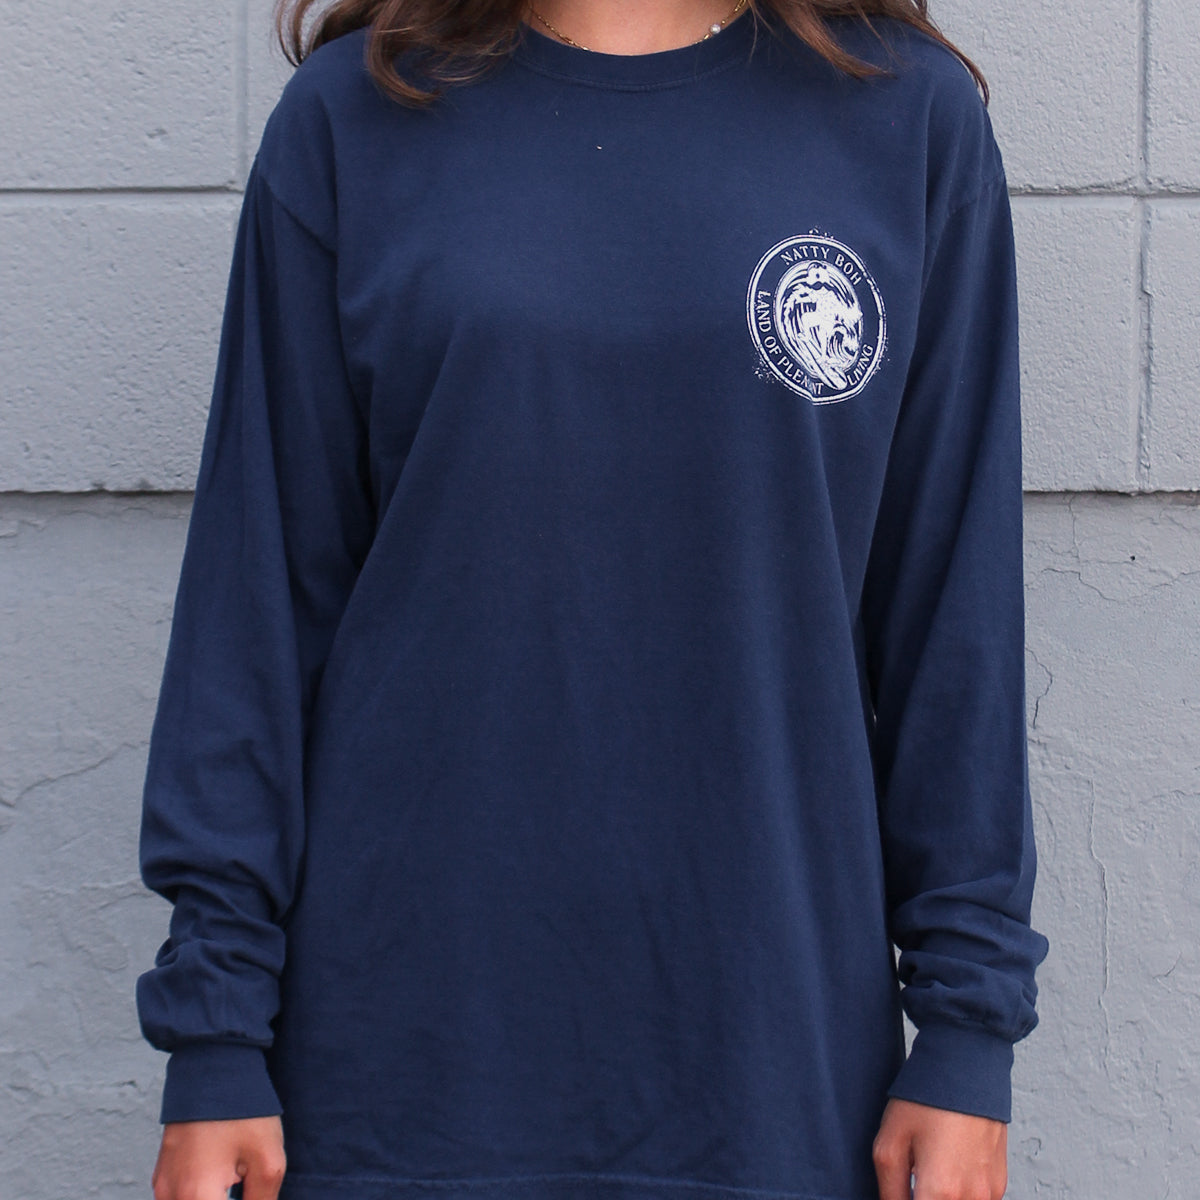 Natty Boh Surfer Dude Land of Pleasant Living (True Navy) / Long Sleeve Shirt - Route One Apparel